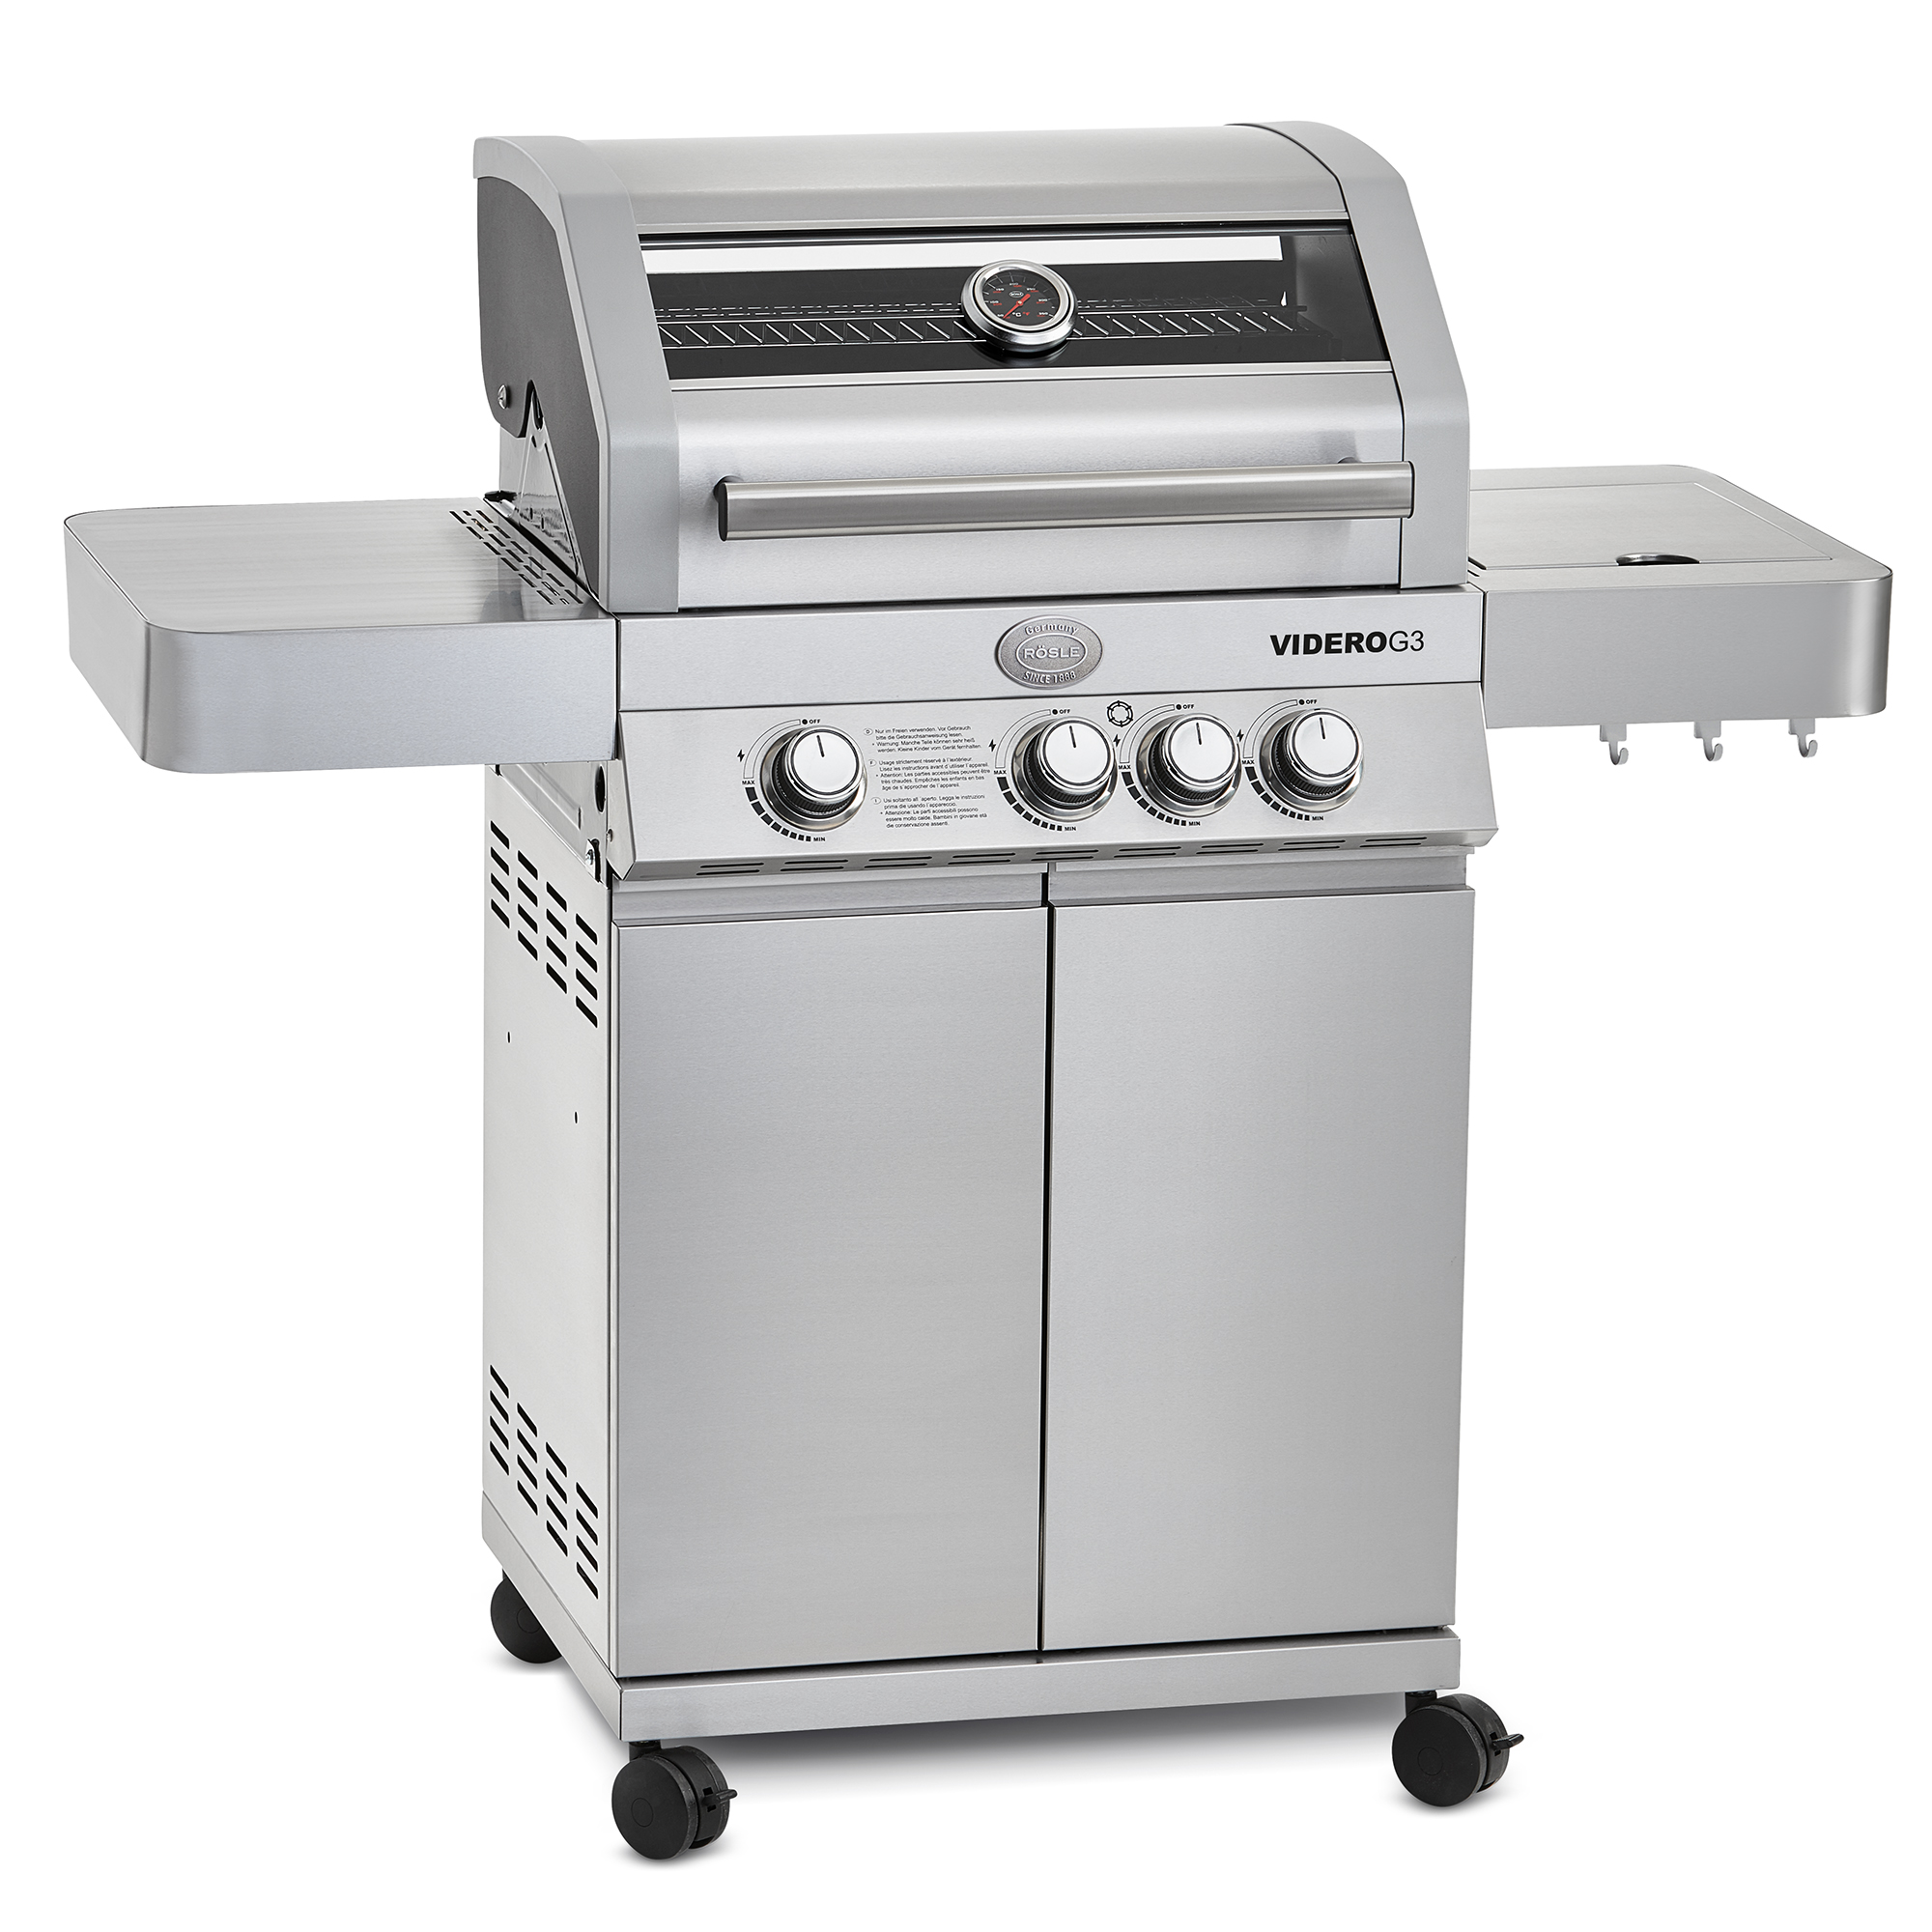 Gas gill BBQ station Videro G3 stainless steel 50 mbar (Model year 2021)